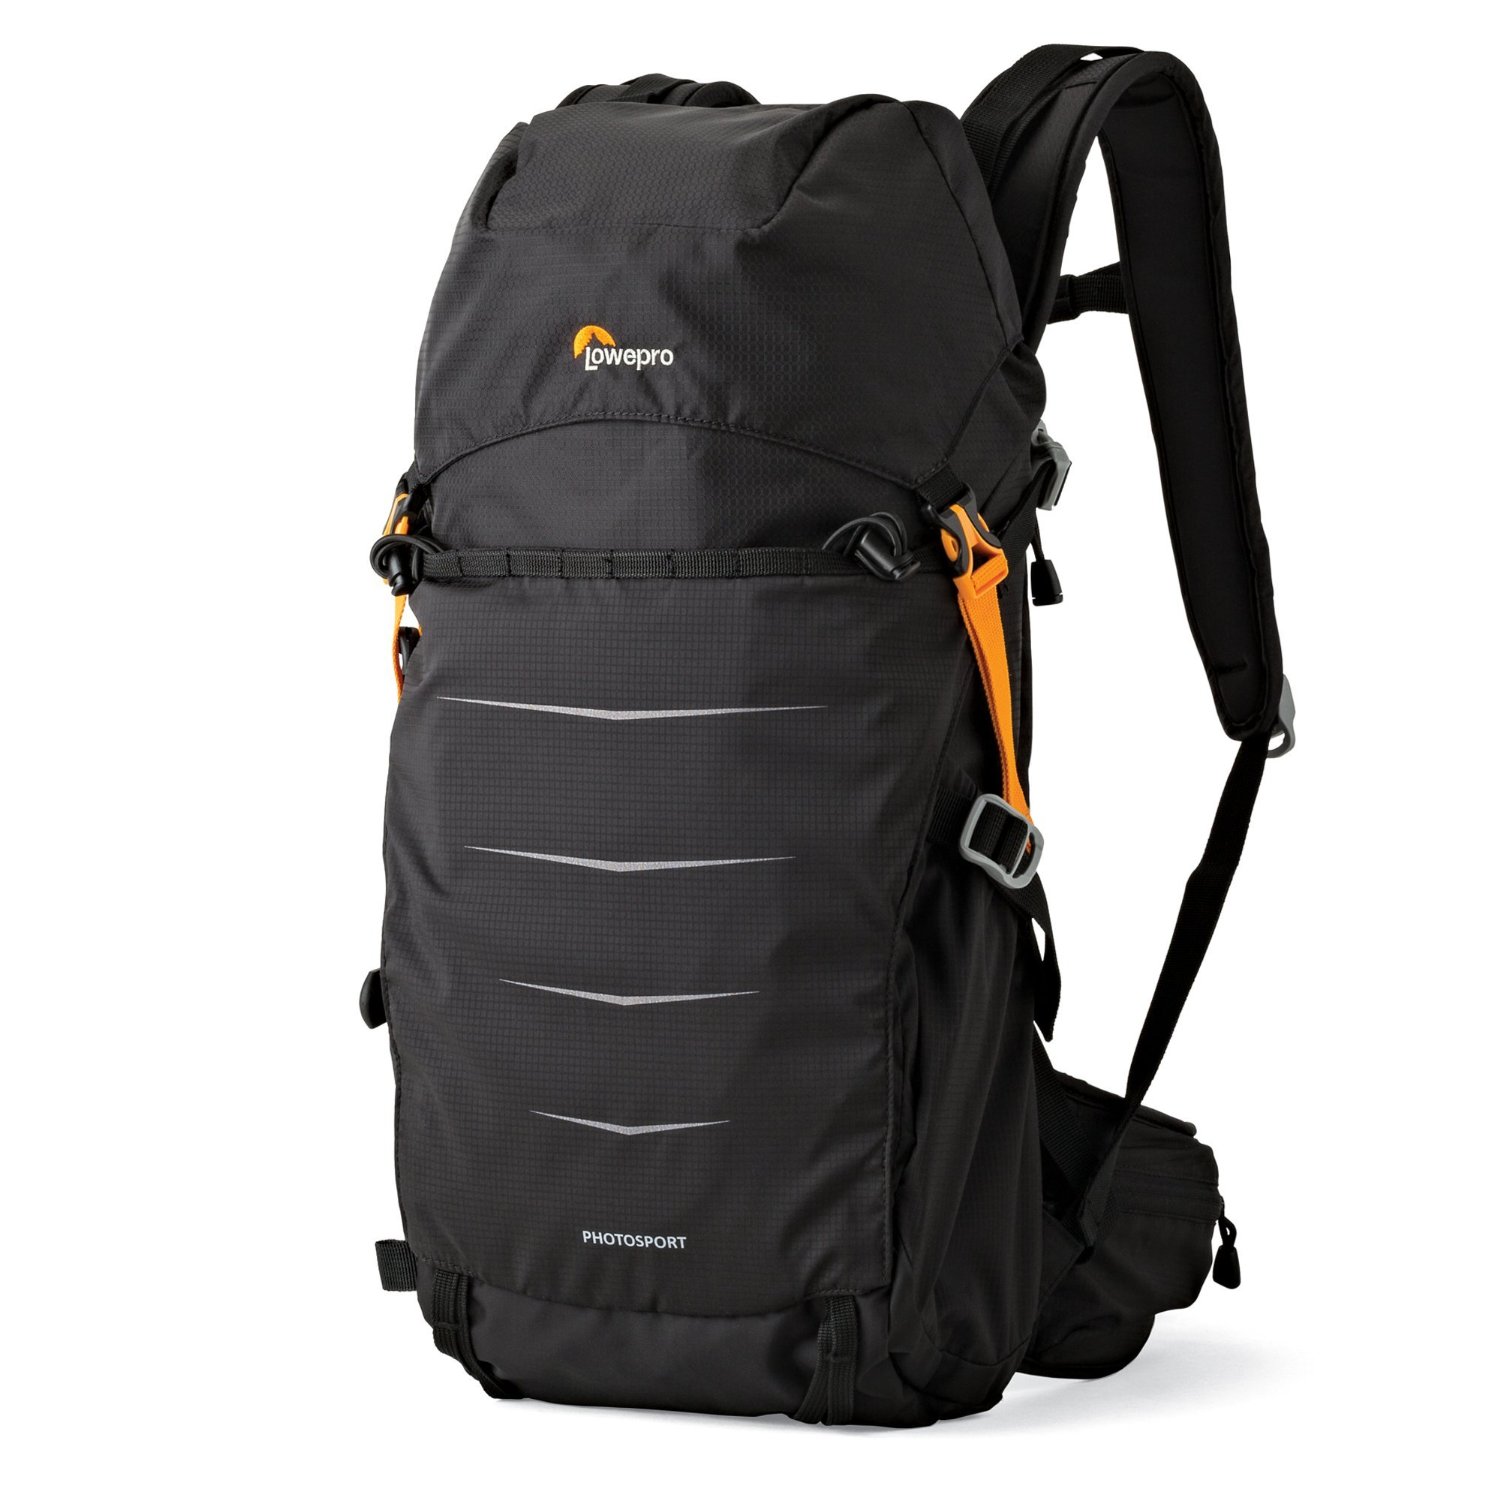 10 Best Hiking Camera Backpacks: Your Buyer's Guide (2019) - Lowepro Photo Sport Backpack Camera Backpack Hiking Camera Backpack Camera Backpack Reviews